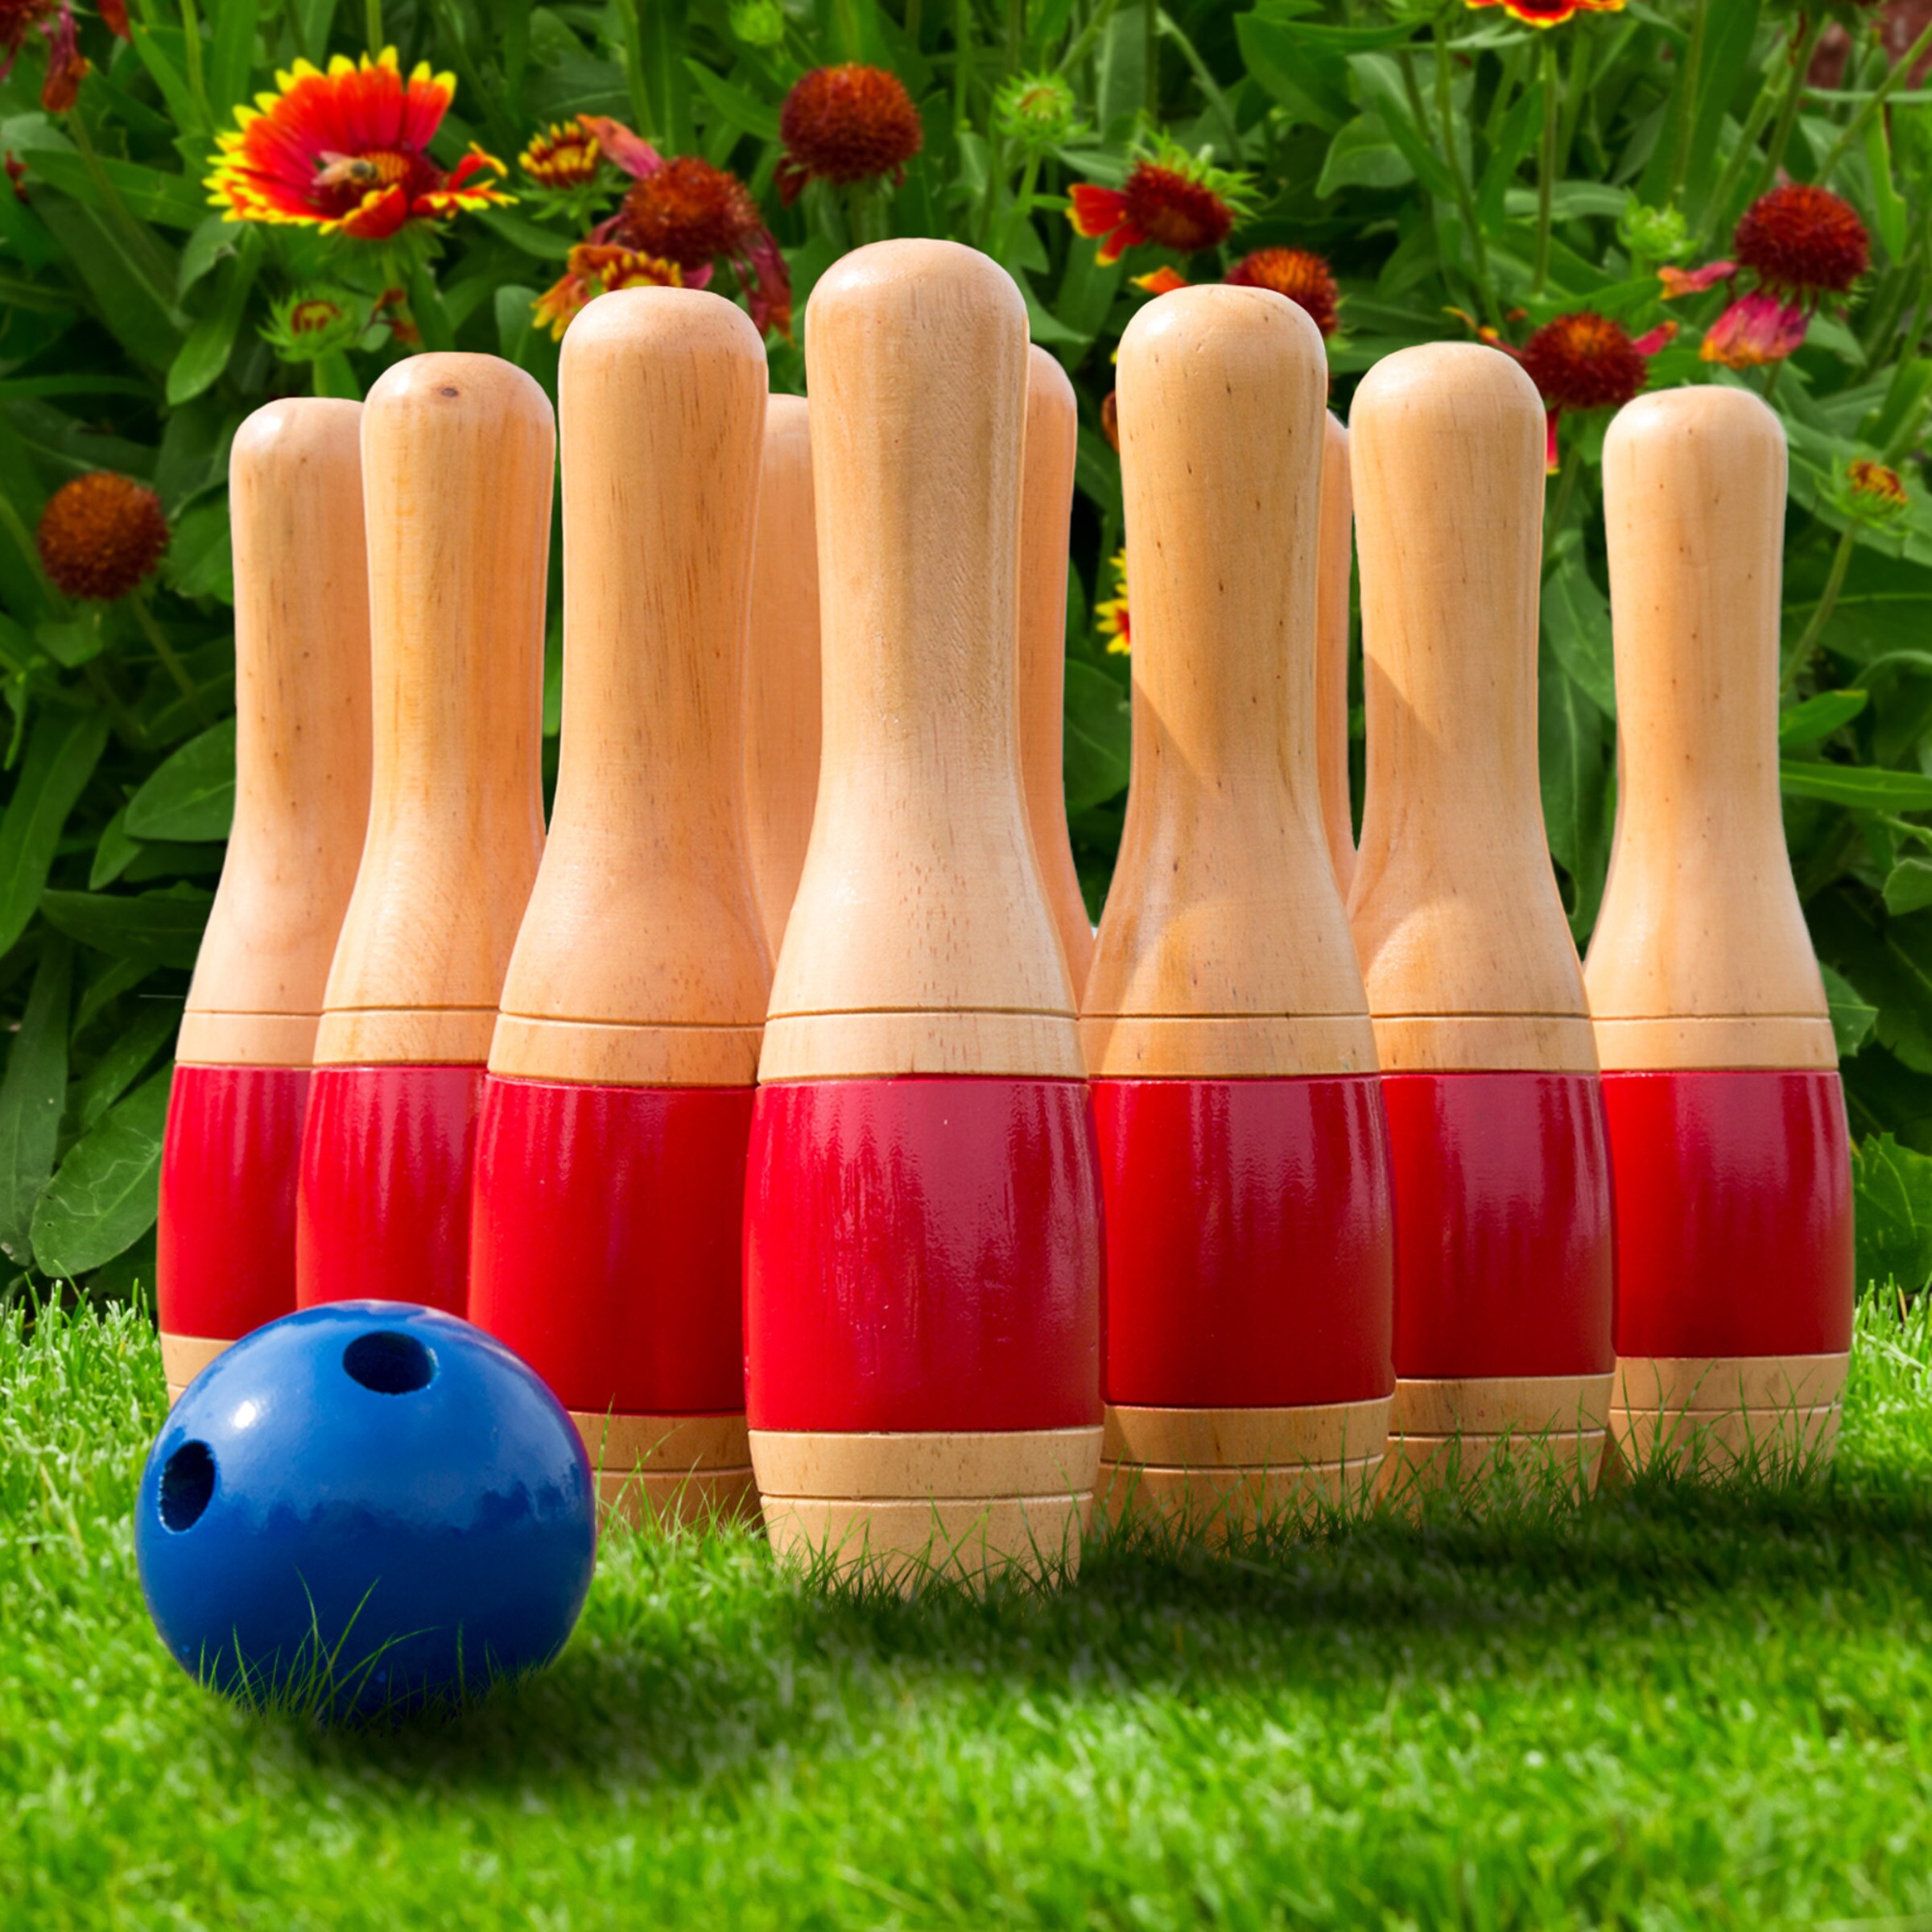 10 Pin Skittle 2 Balls Bowling Set Indoor Outdoor Party Game Toy Kid Child Gift